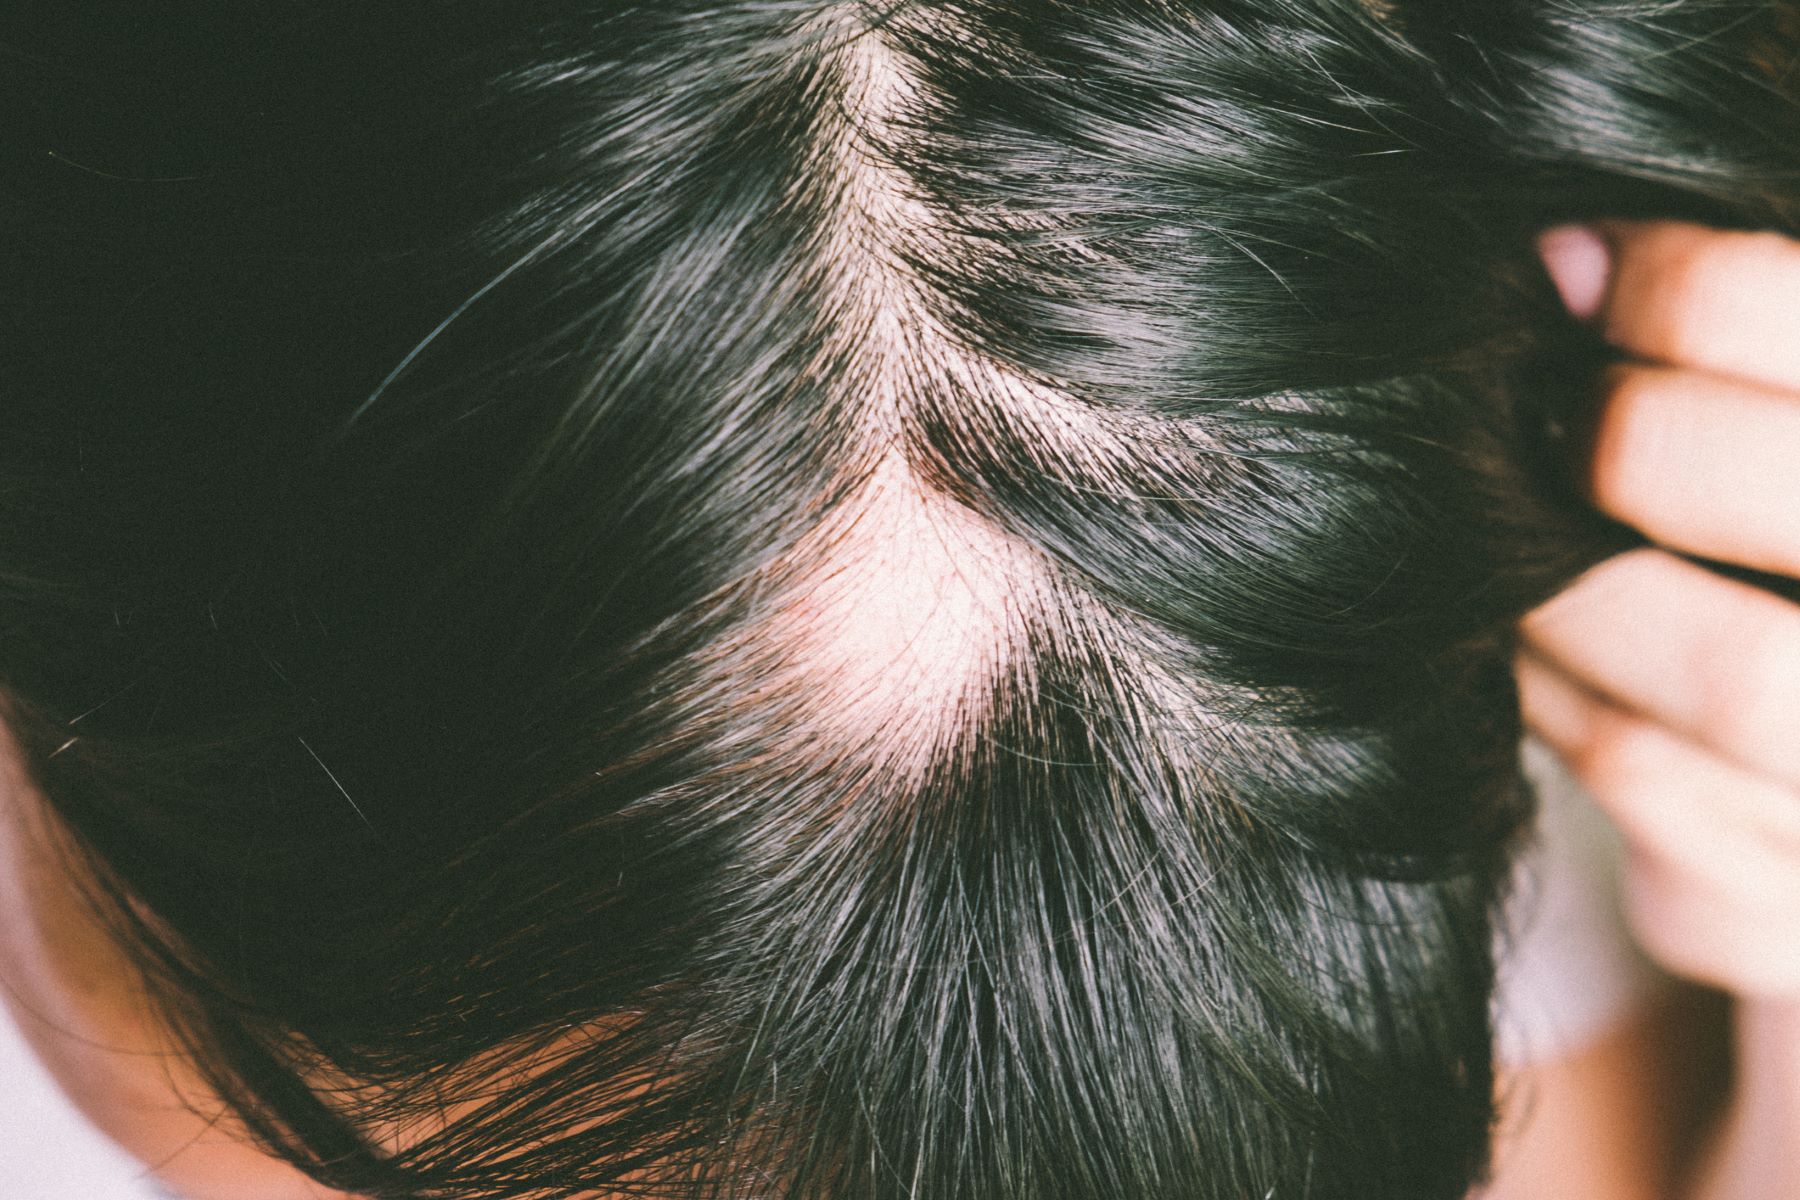 Patient with alopecia areata